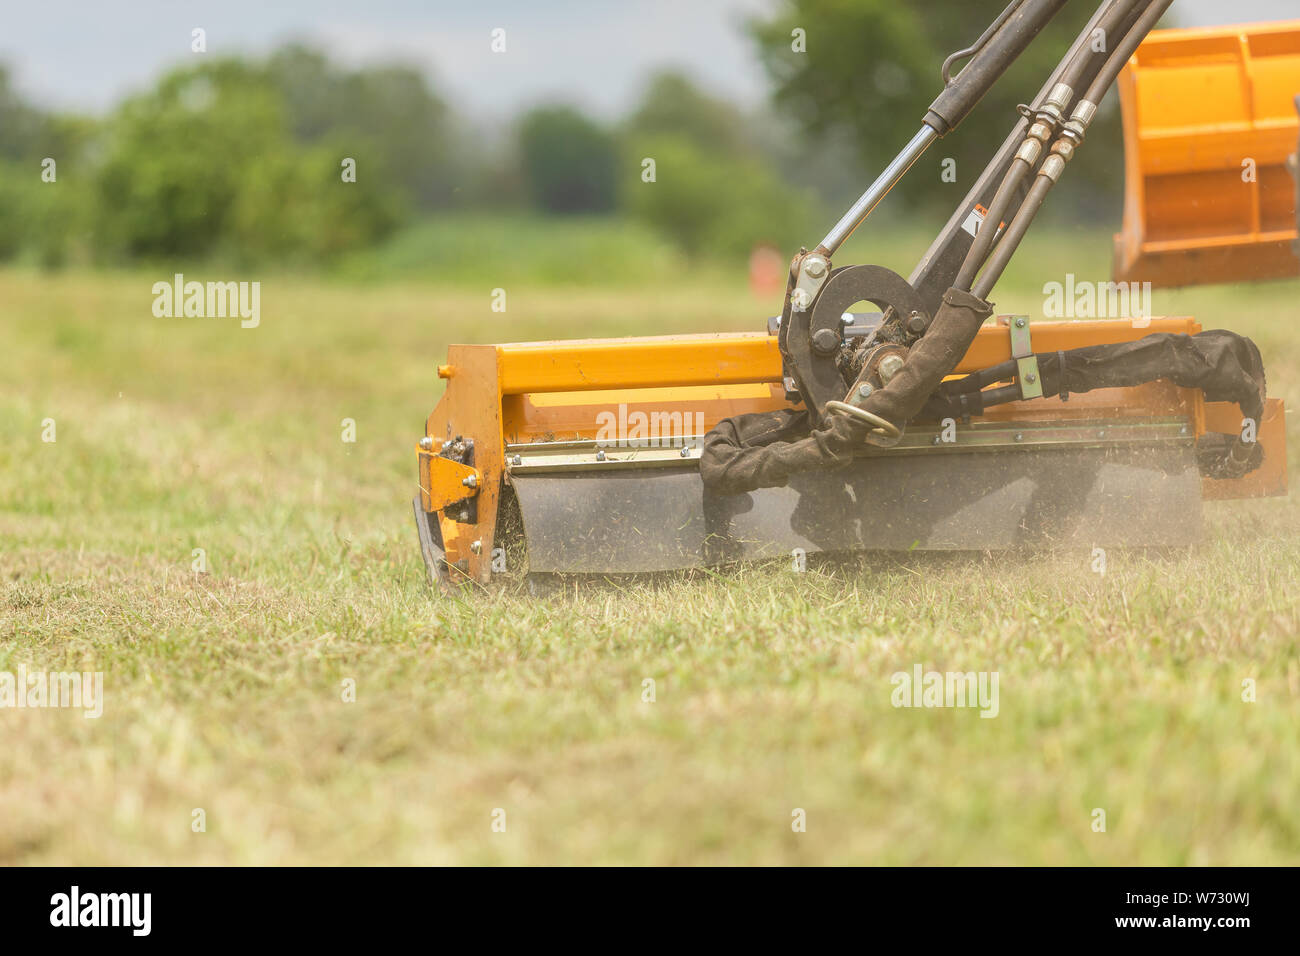 Tractor with a mechanical mower mowing grass on the side of the asphalt road. Working outdoor concept Stock Photo